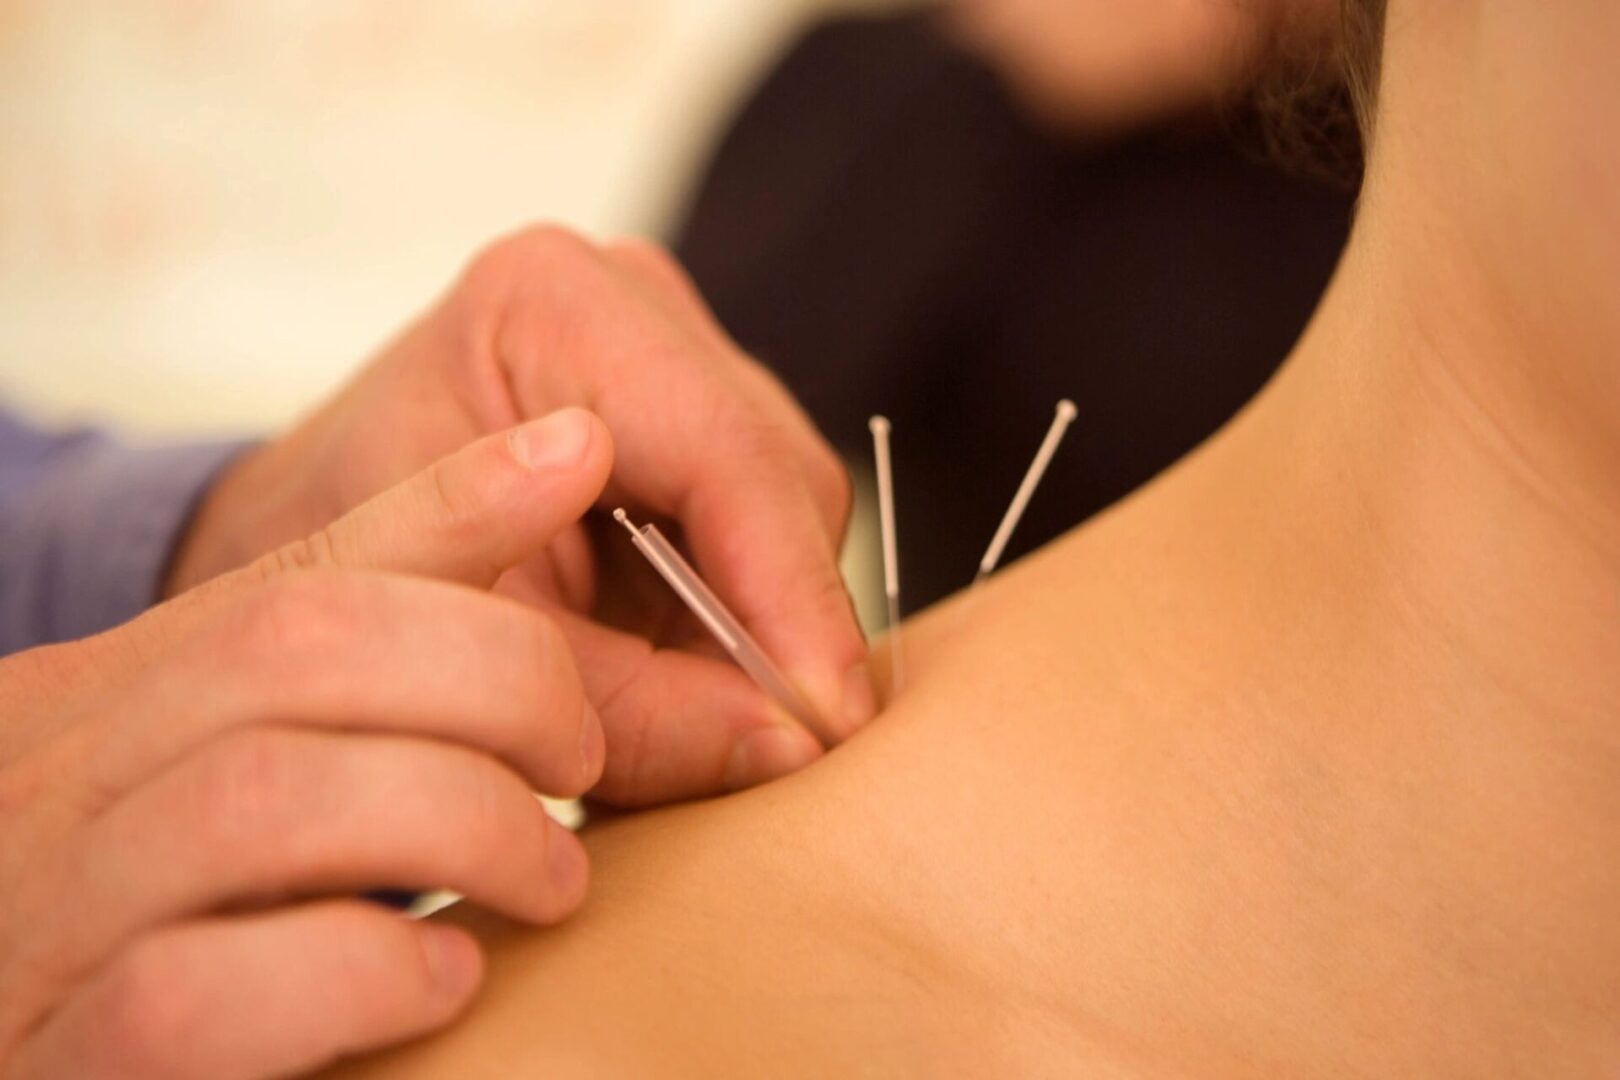 A person is using acupuncture needles on the back of another person.